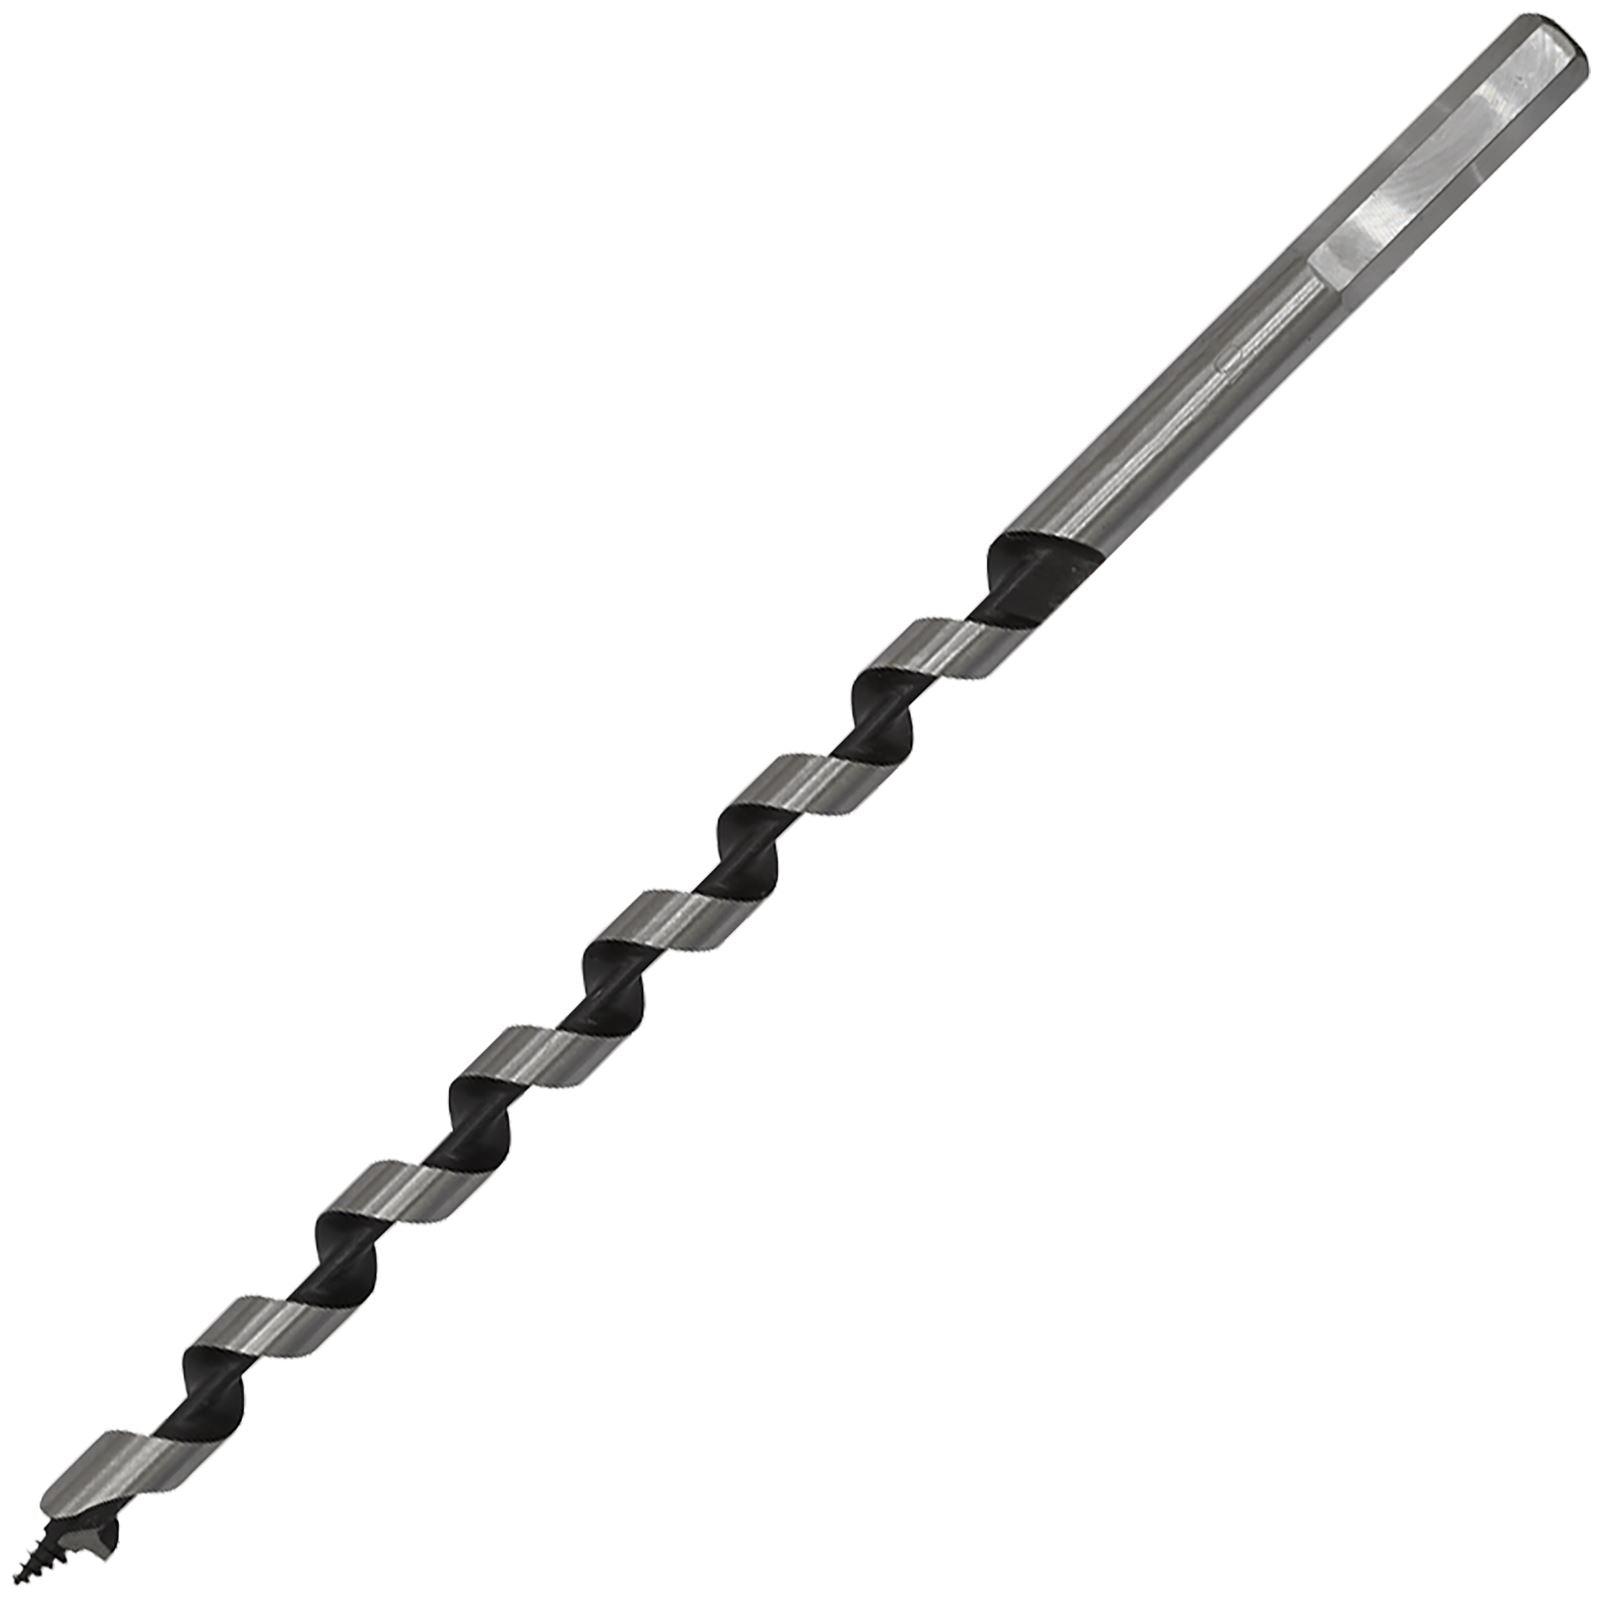 Worksafe by Sealey Auger Wood Drill Bit 10mm x 235mm